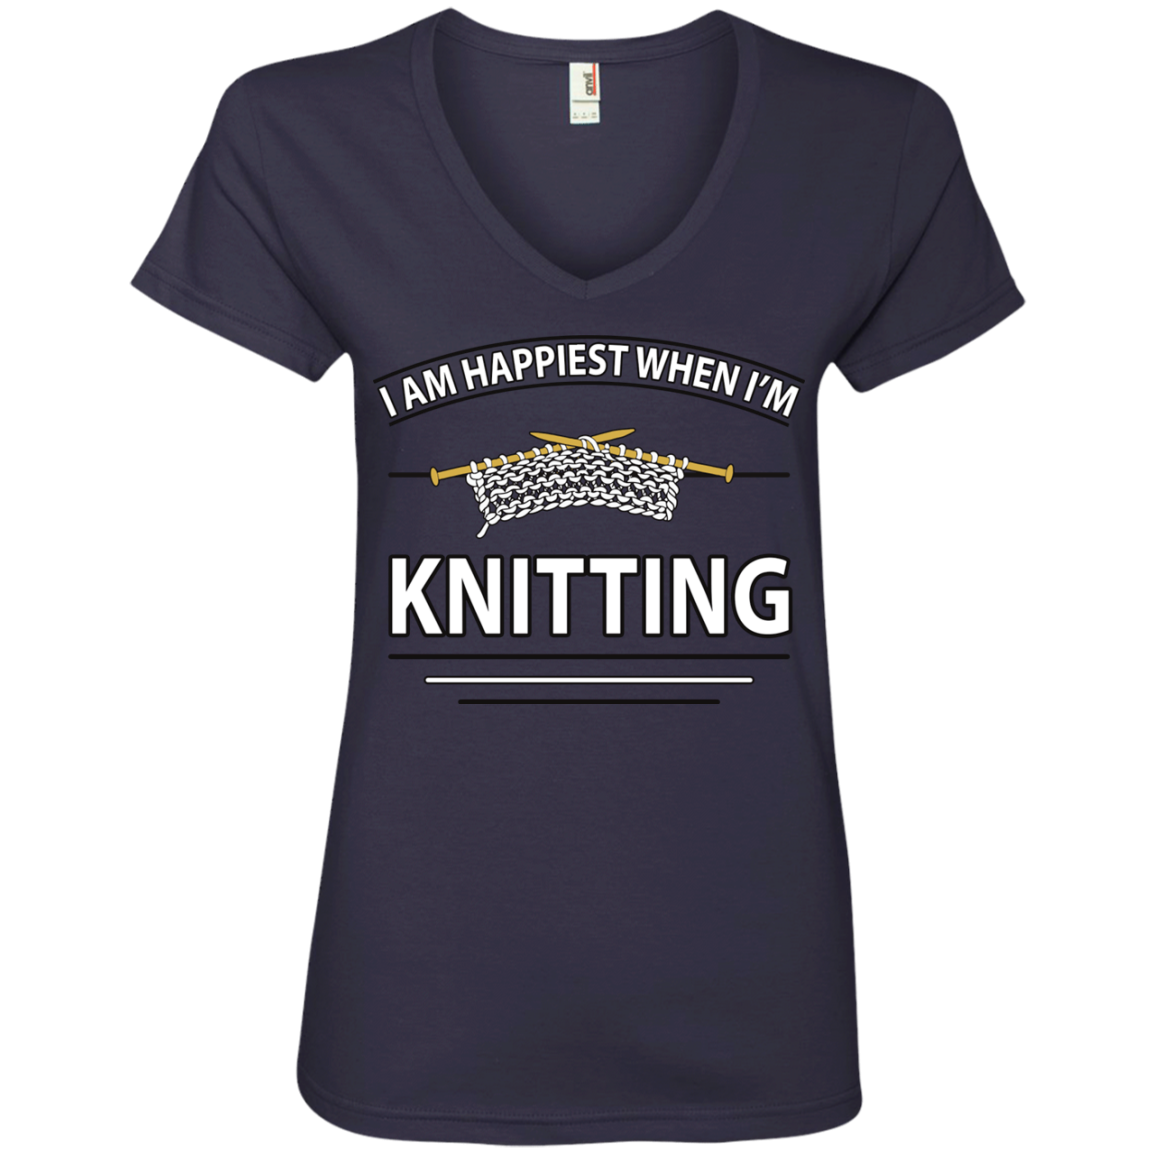 I Am Happiest When I'm Knitting Ladies V-neck Tee - Crafter4Life - 5